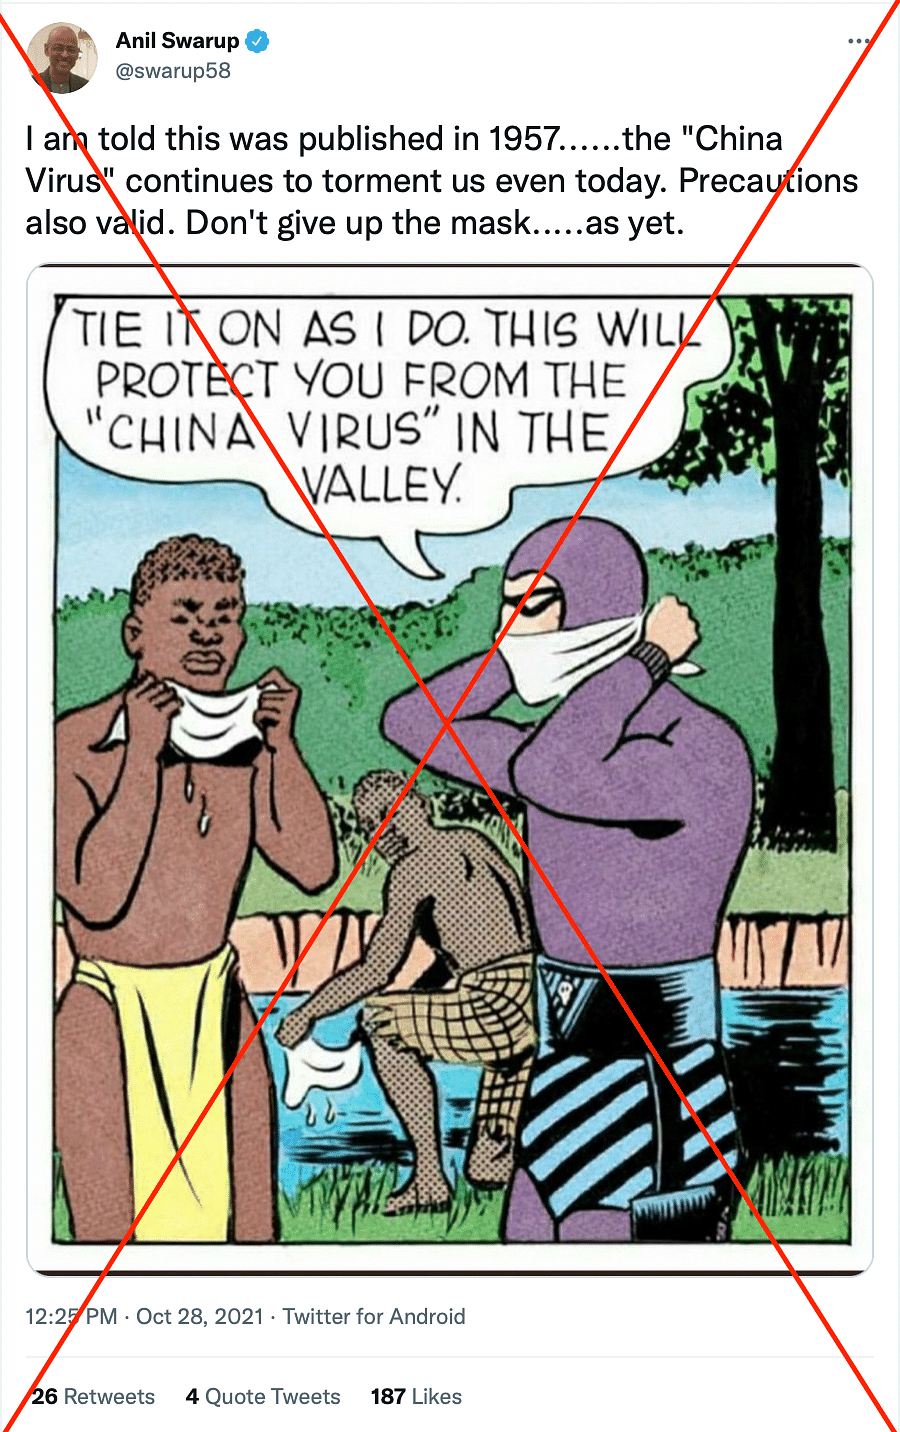 In the original comics, The Phantom shows people how to protect themselves from 'sleep death', not 'China Virus'.